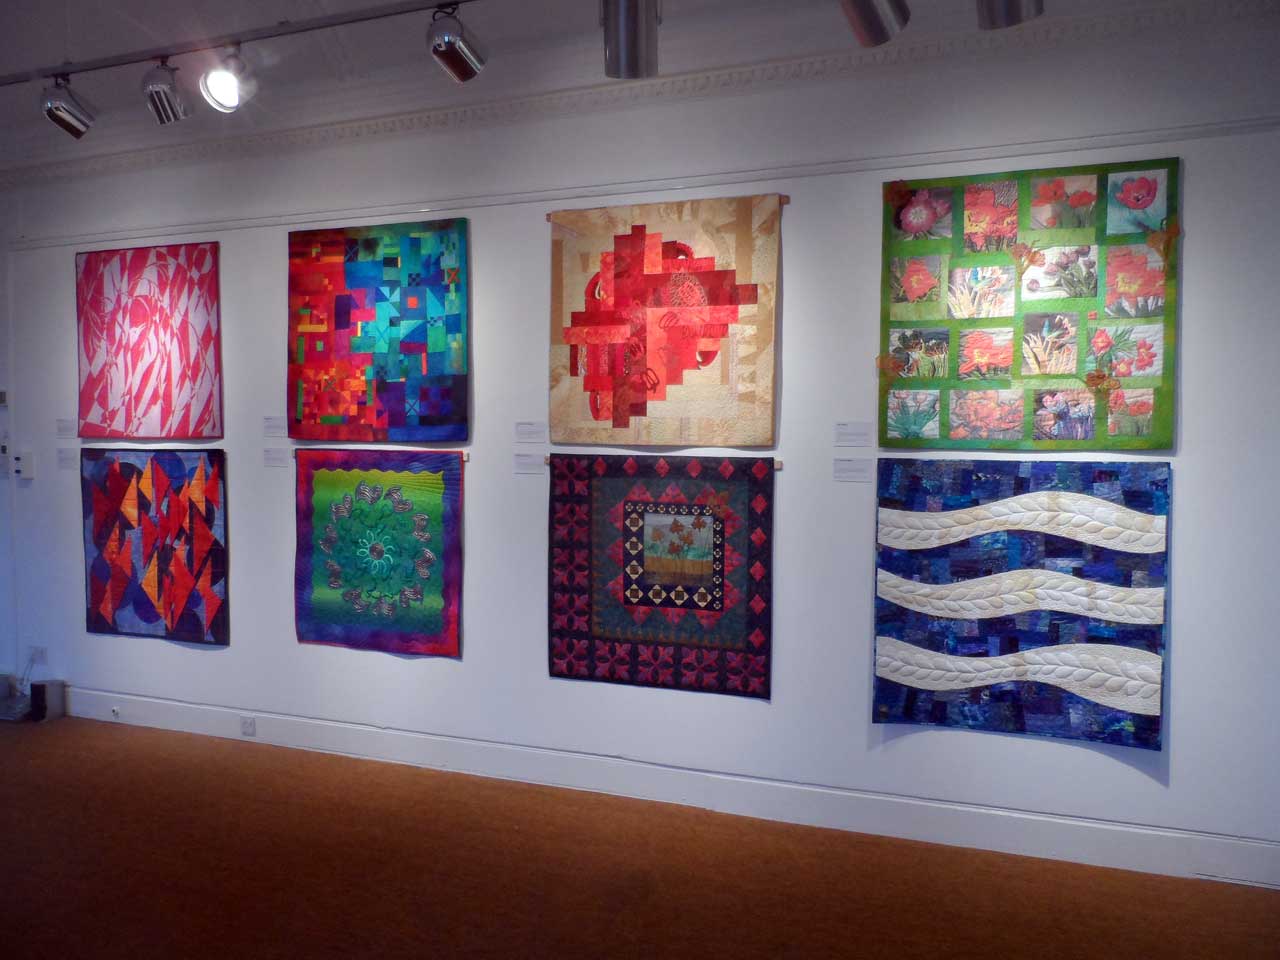 Photo: The 25 for 25 Collection - Quilt Exhibition